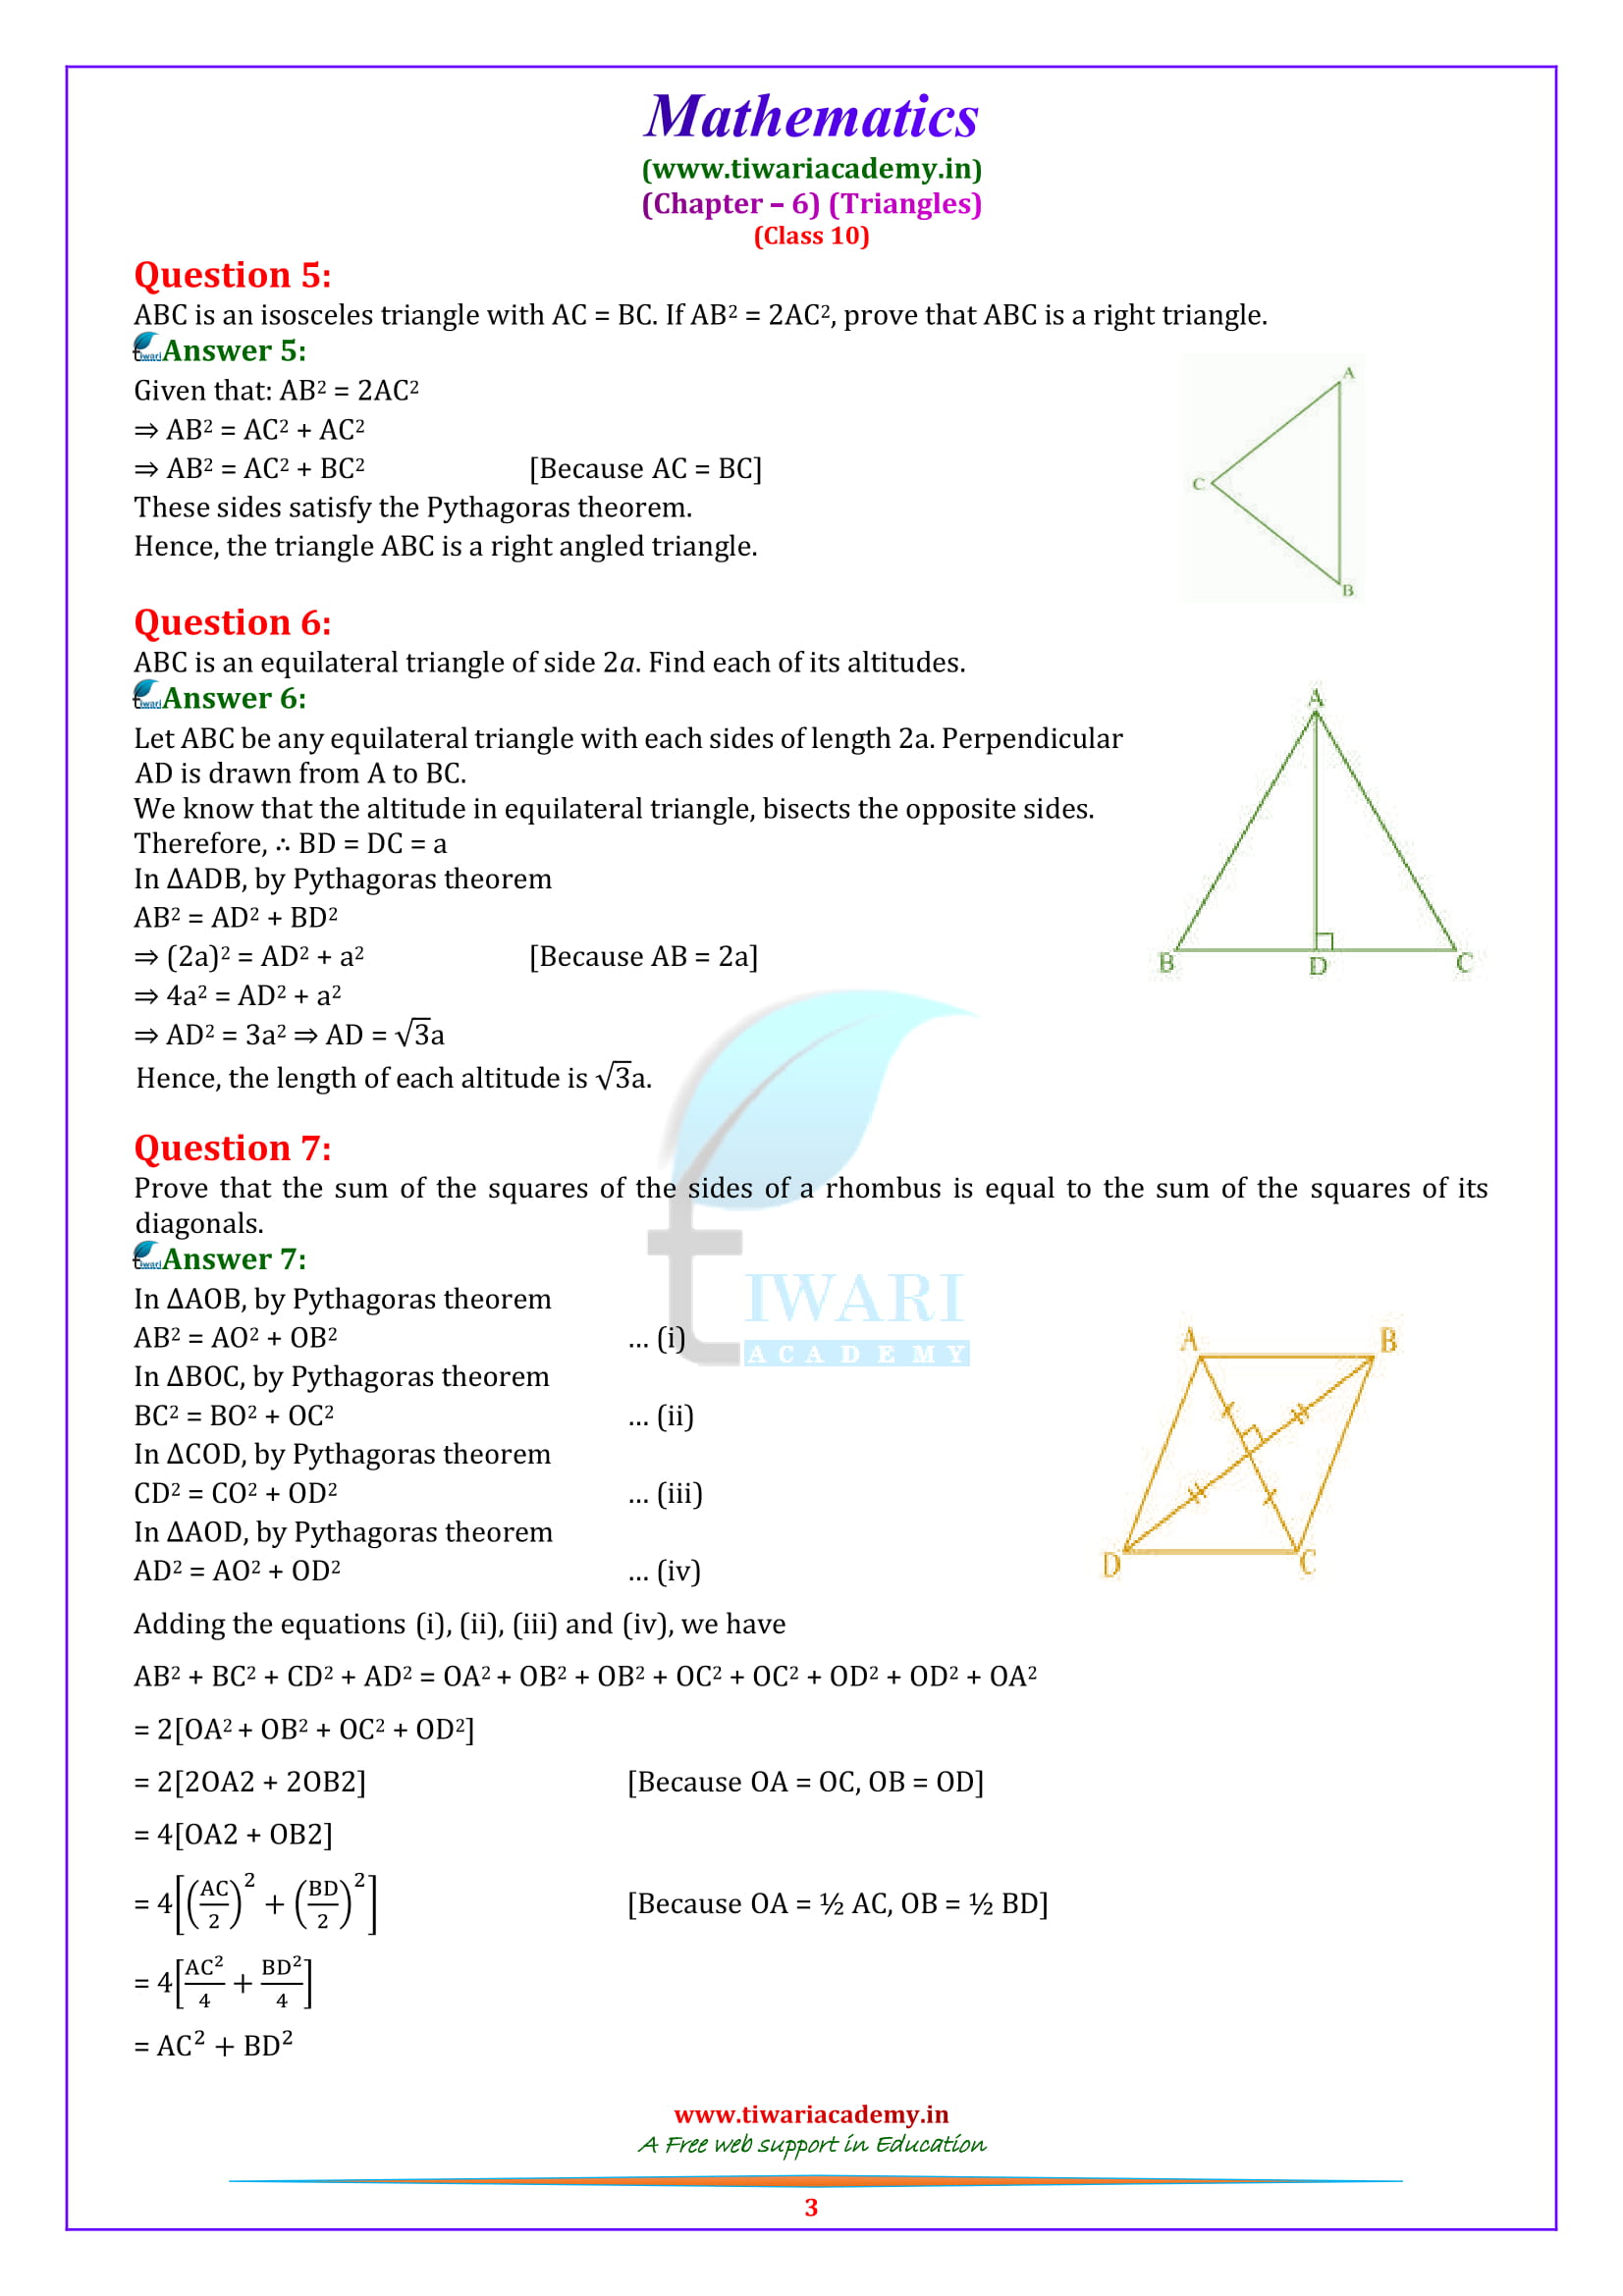 10 Maths Exercise 6.5 solutions for up board high school